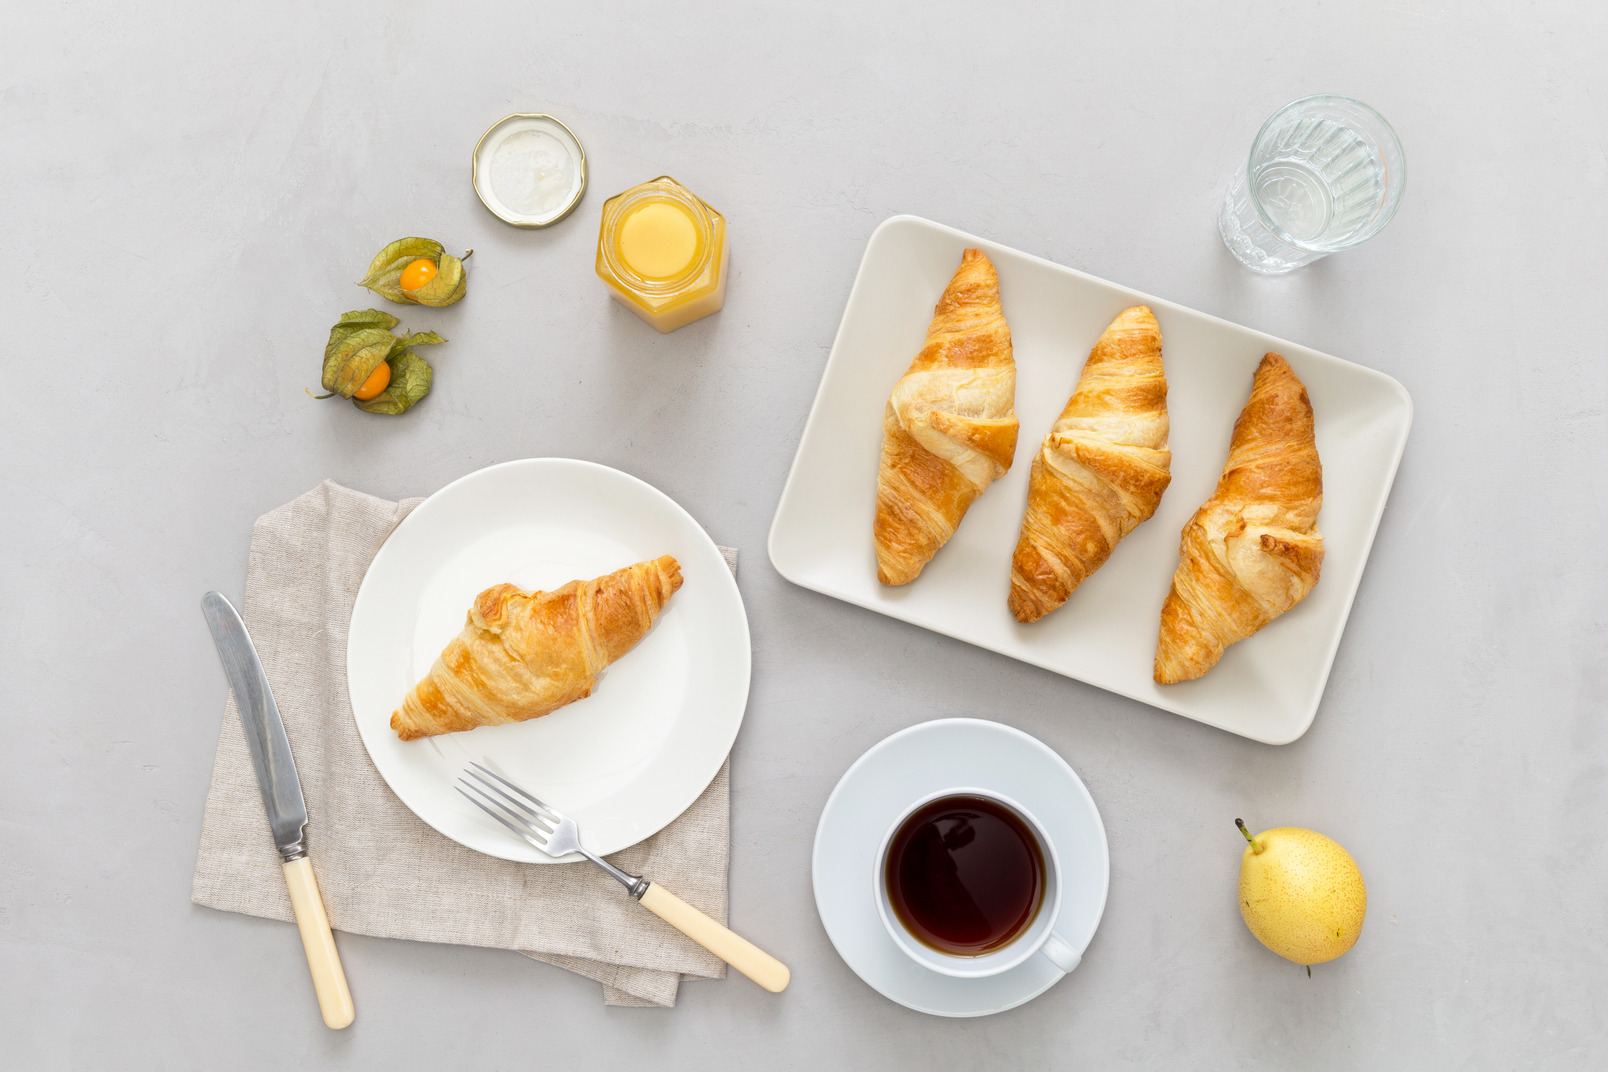 What can be better than a fresh crunchy croissant and a cup of coffee?